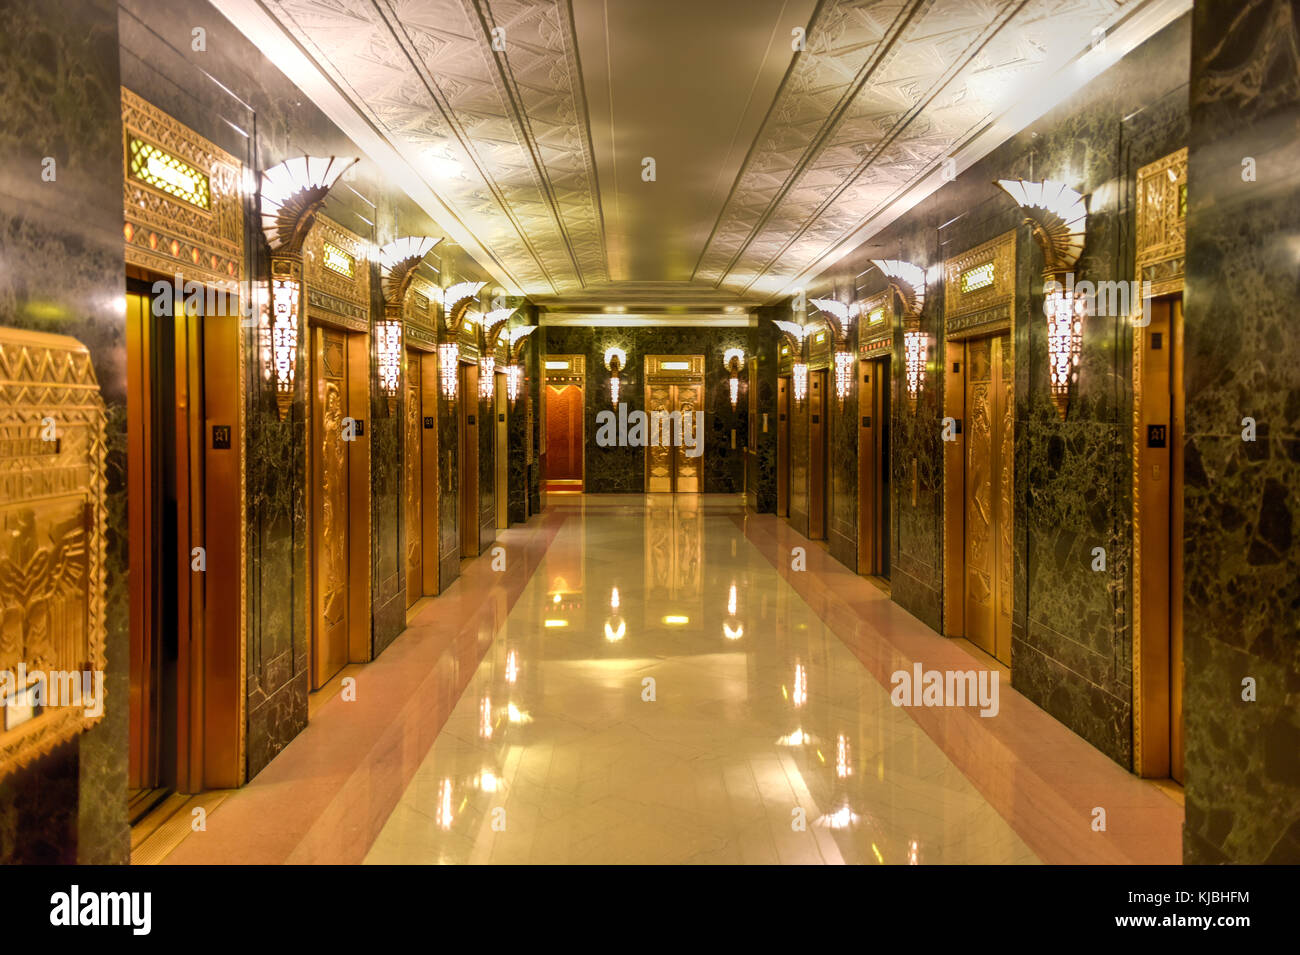 Chicago - September 7, 2015: Lobby of One North LaSalle Building in the loop district. Stock Photo